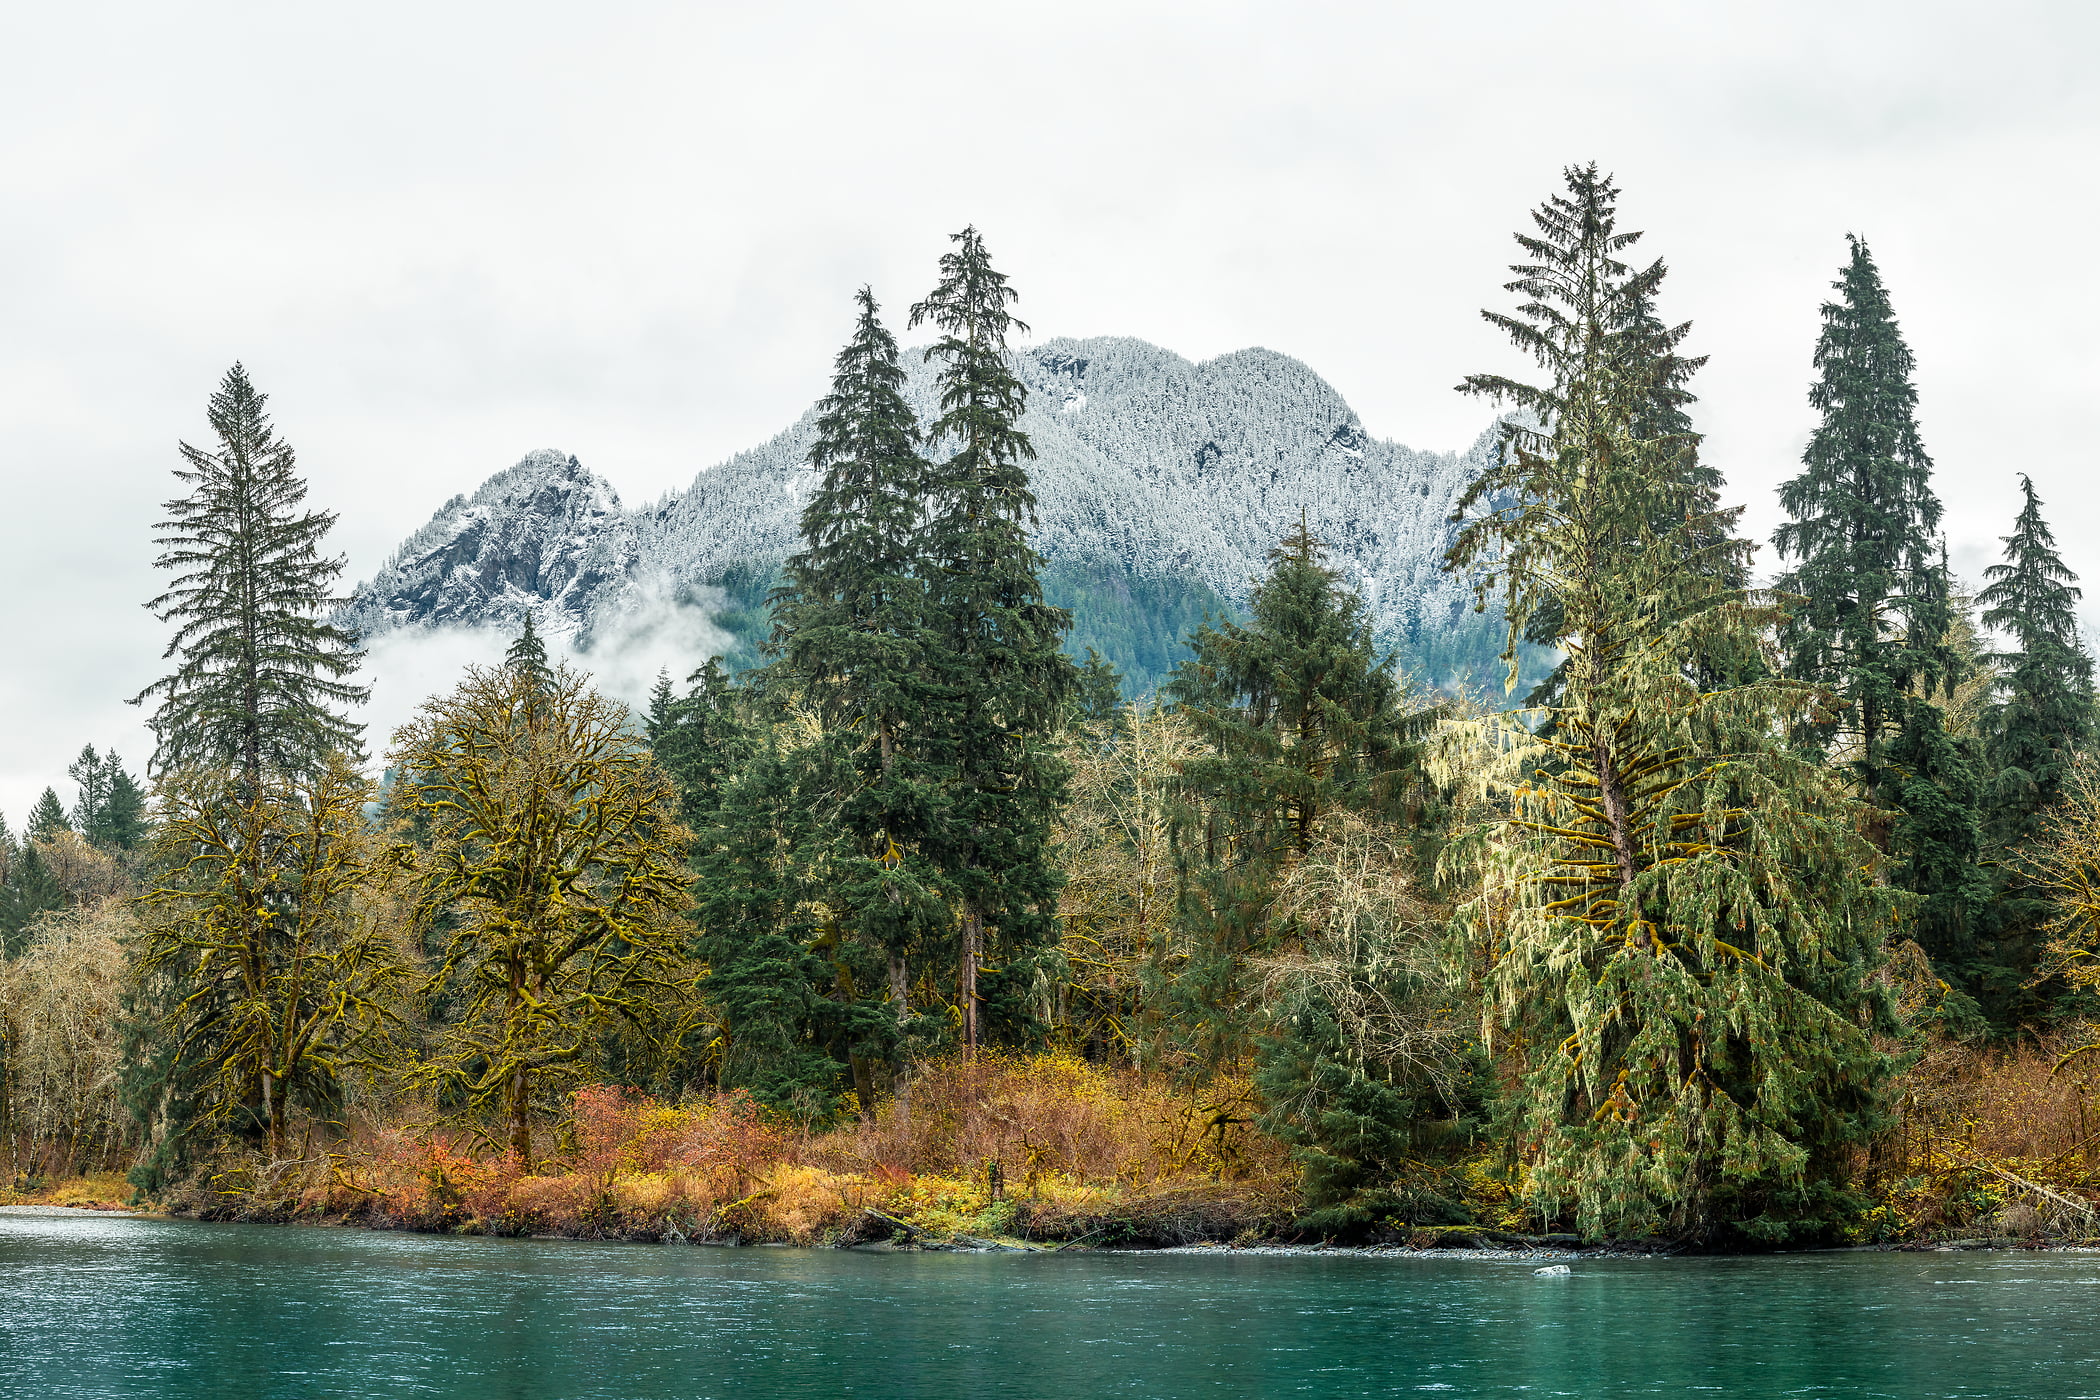 357 megapixels! A very high resolution, large-format VAST photo print of a river with evergreen trees and a mountain; nature photograph created by Scott Rinckenberger in Middle Fork of Snoqualmie River, North Bend, Washington.